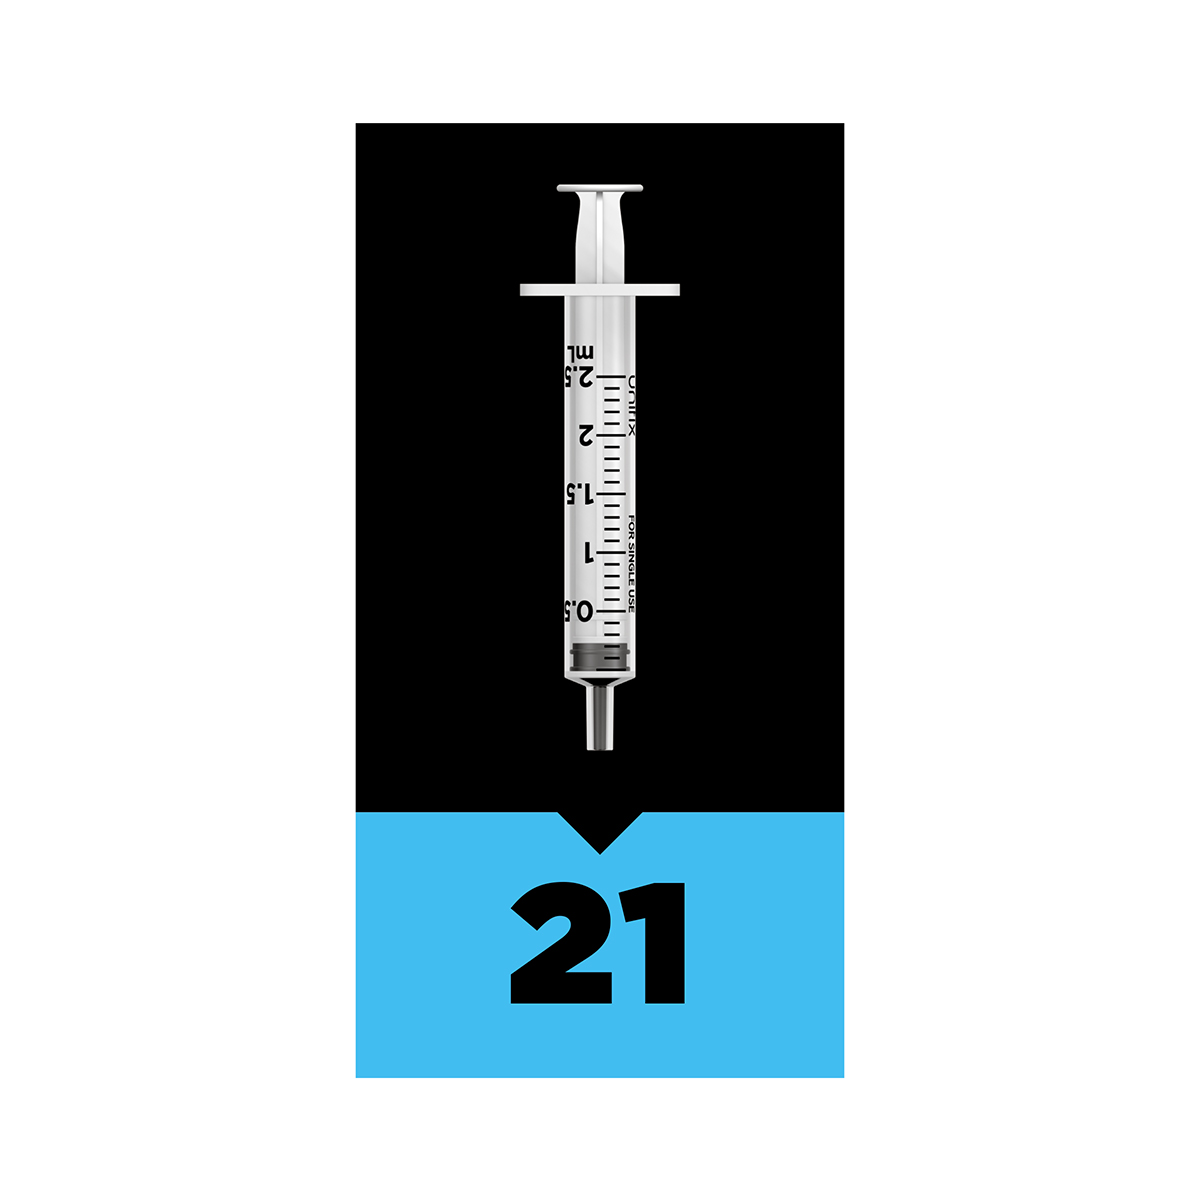 Steroid 12 Week Cycle Kit | 1 injection every 4 days | 21 syringes